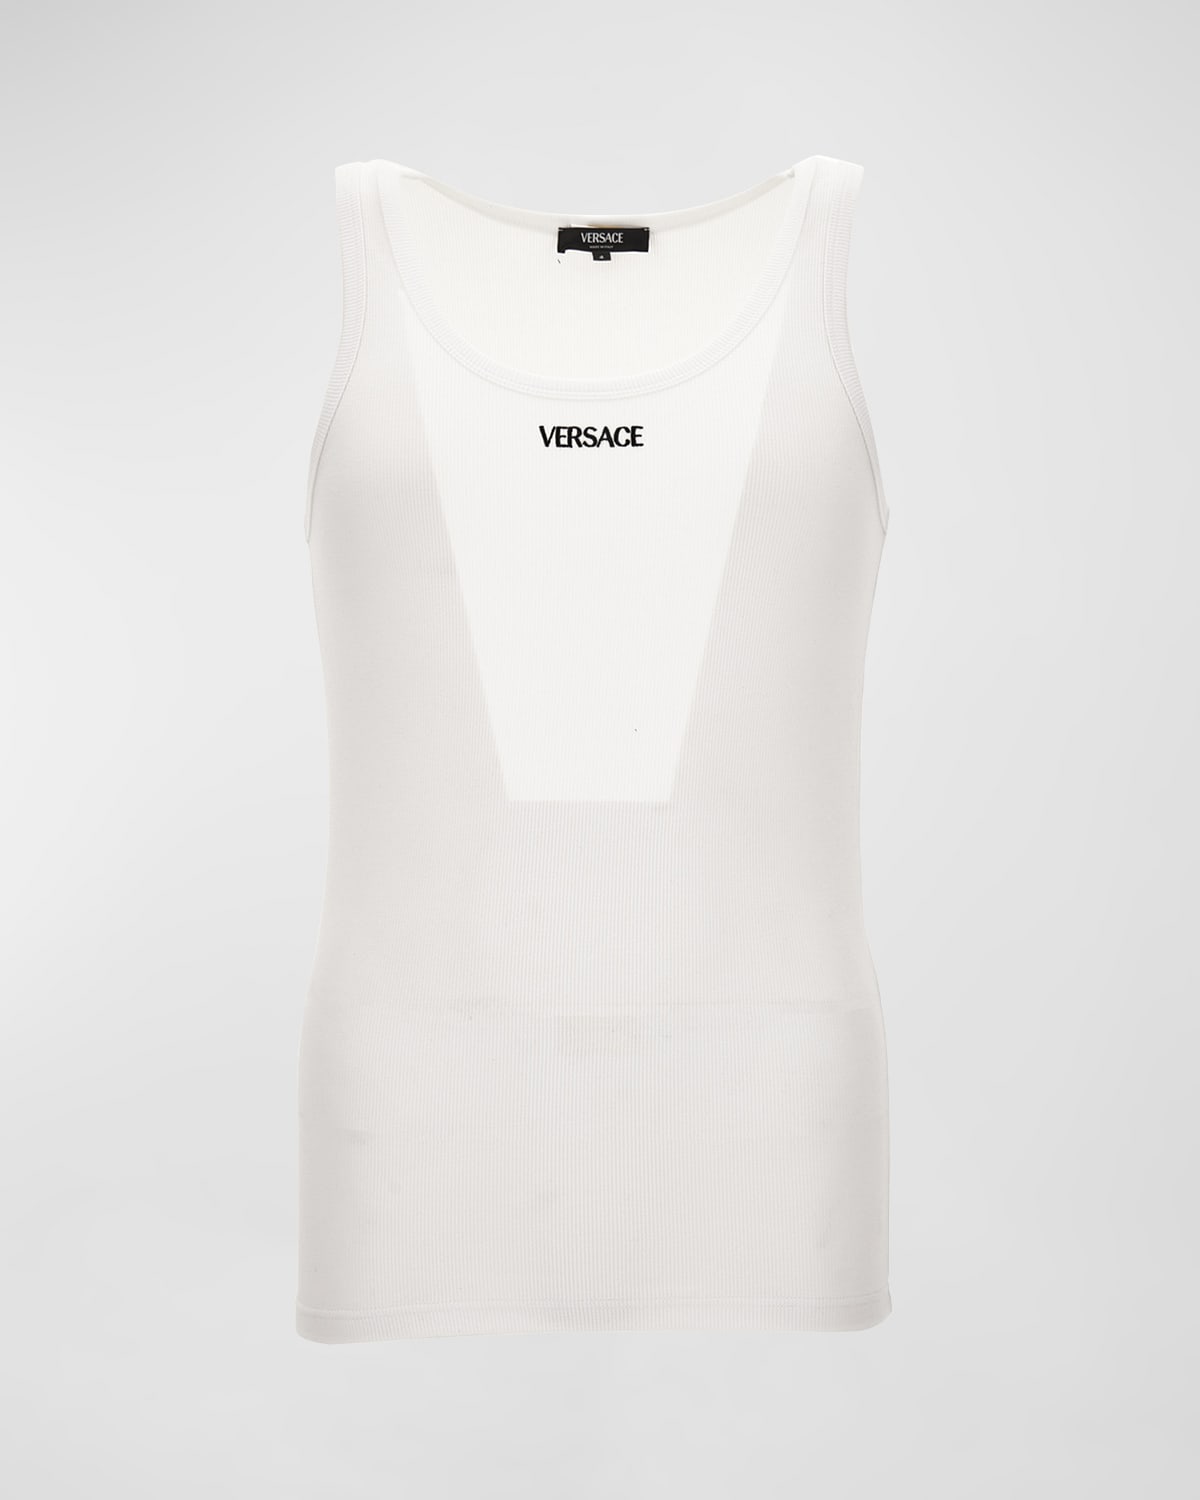 Men's Embroidered Logo Tank Top